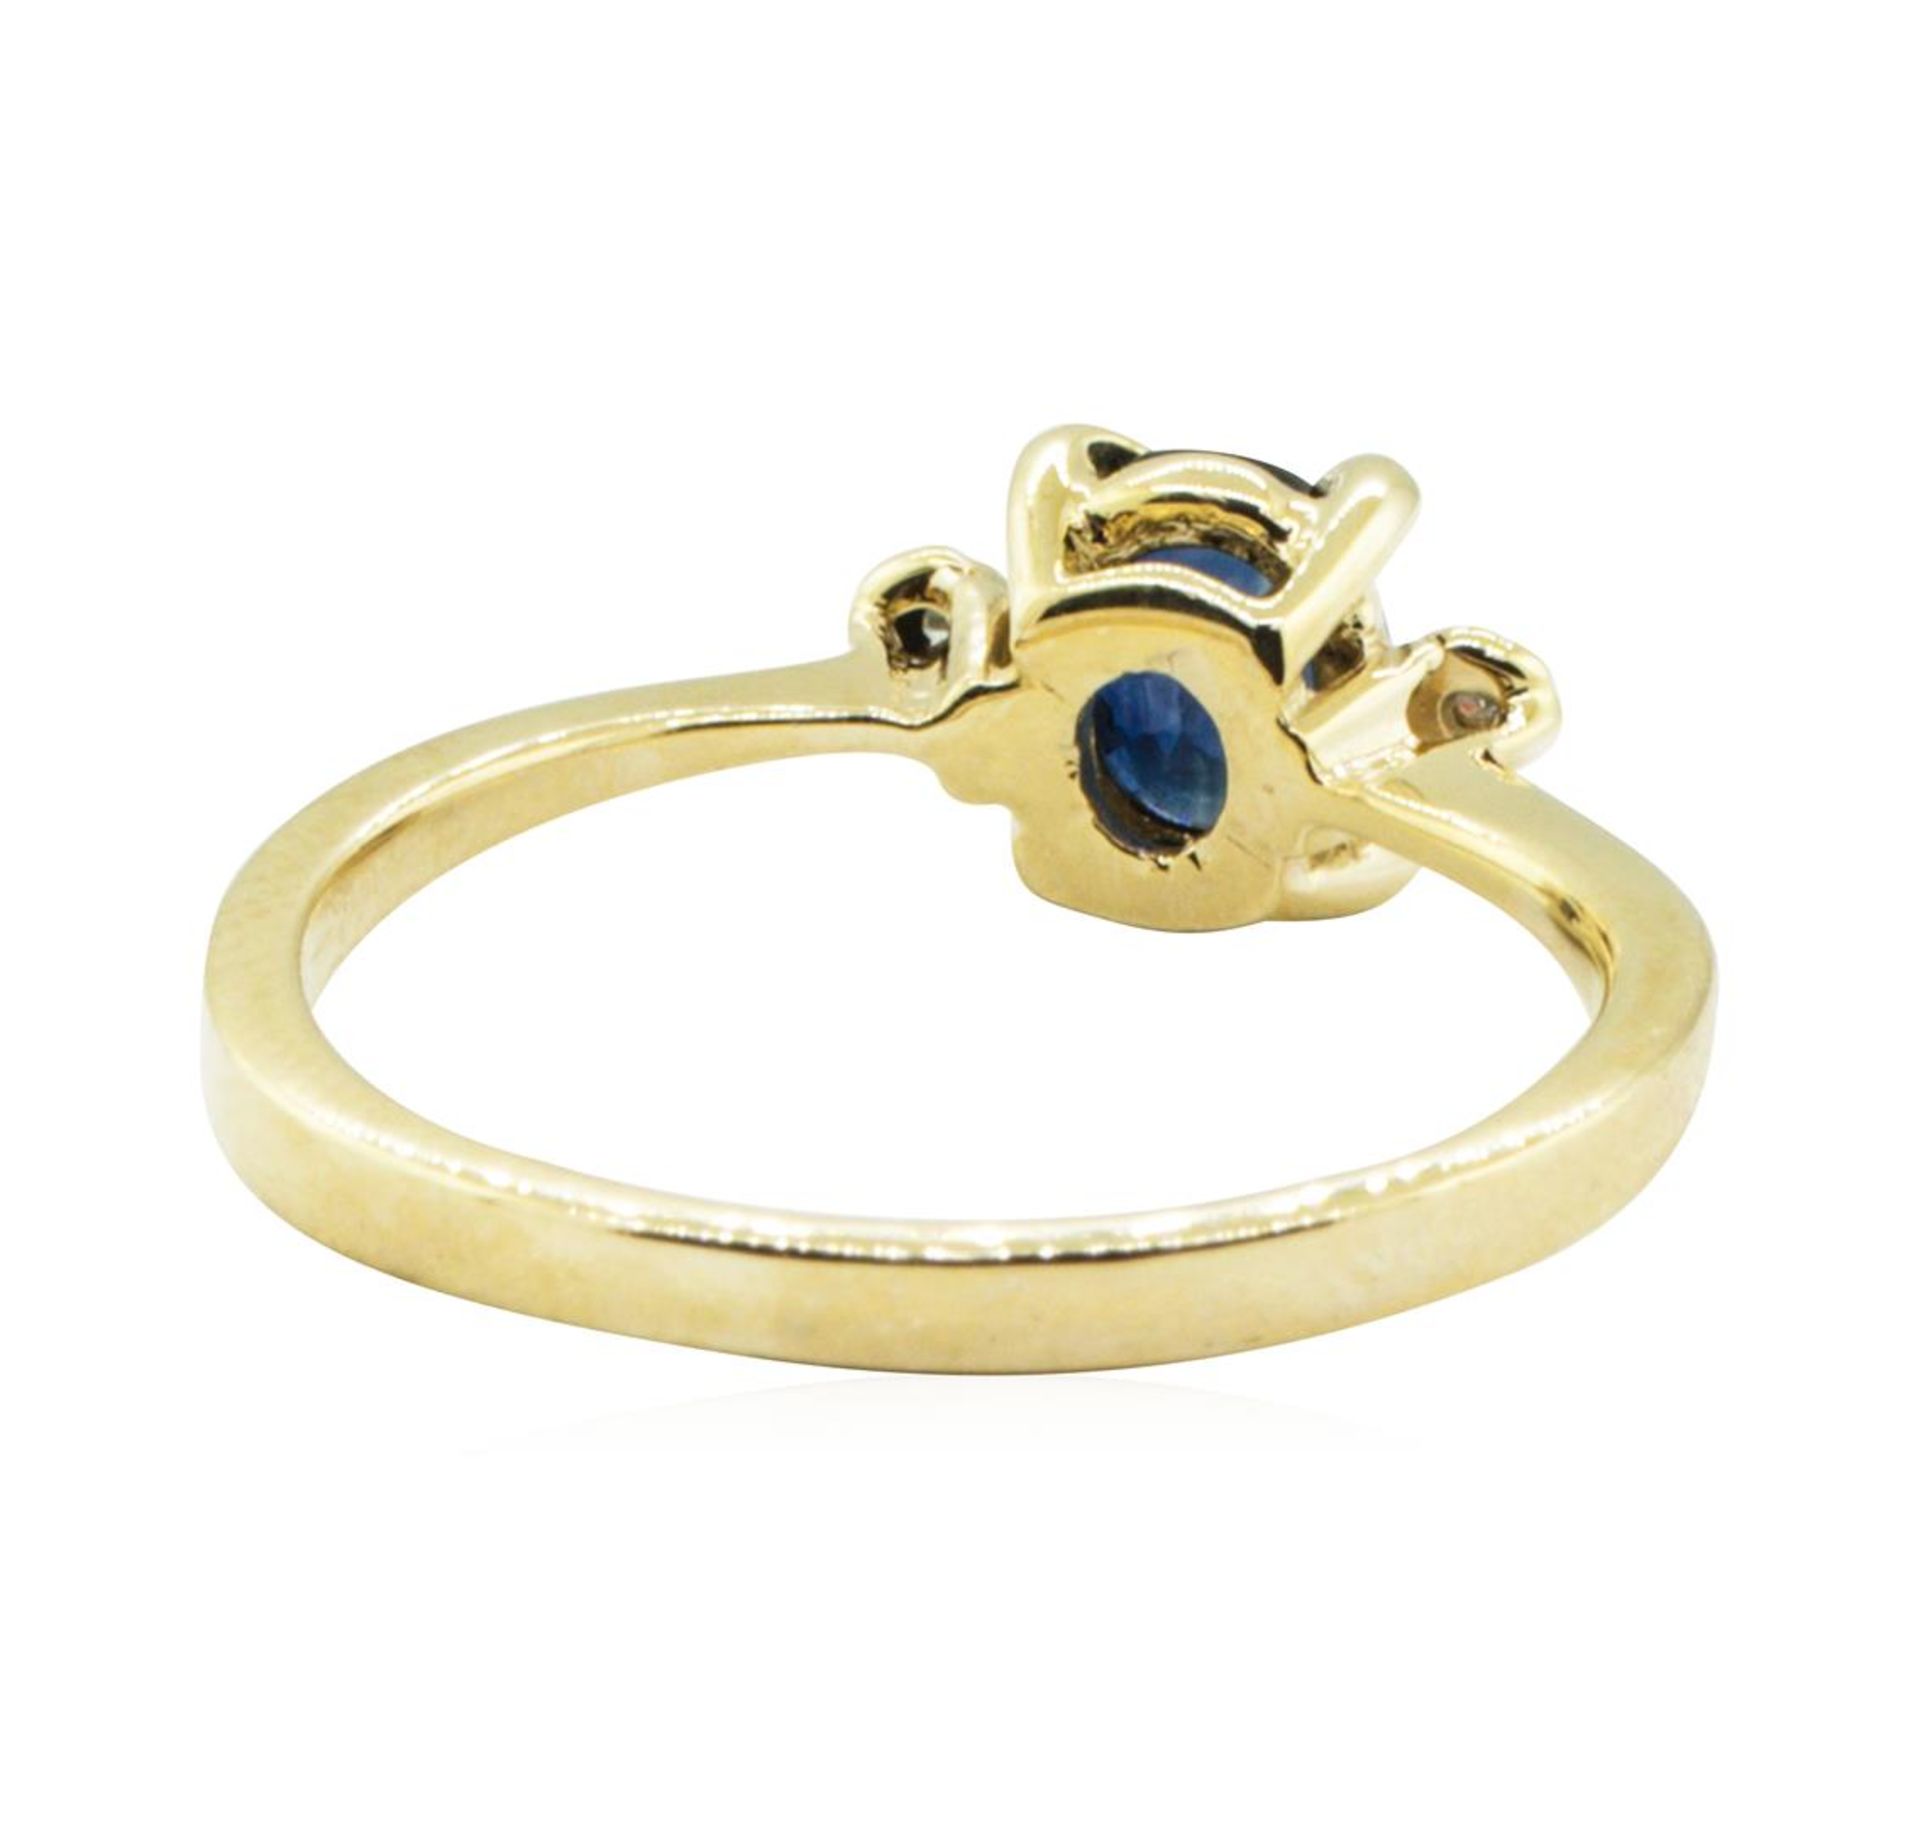 0.69 ctw Blue Sapphire and Diamond Ring - 14KT Yellow Gold - Image 3 of 4